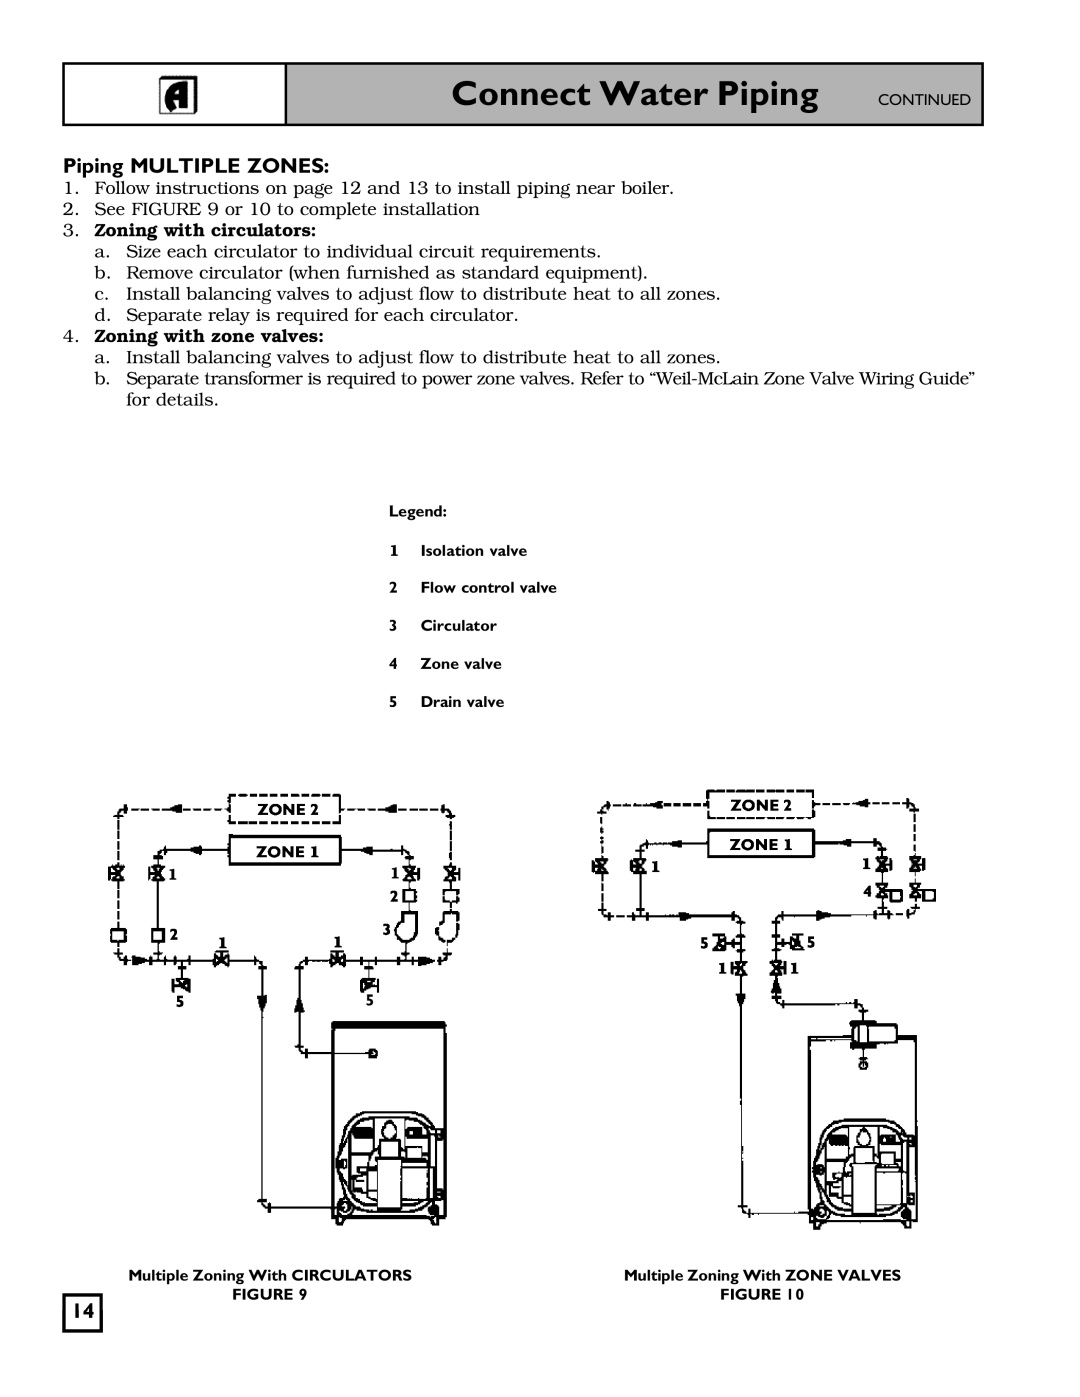 Weil-McLain 550-141-827/1201 manual Piping MULTIPLE ZONES, Connect Water Piping CONTINUED, Zoning with circulators 